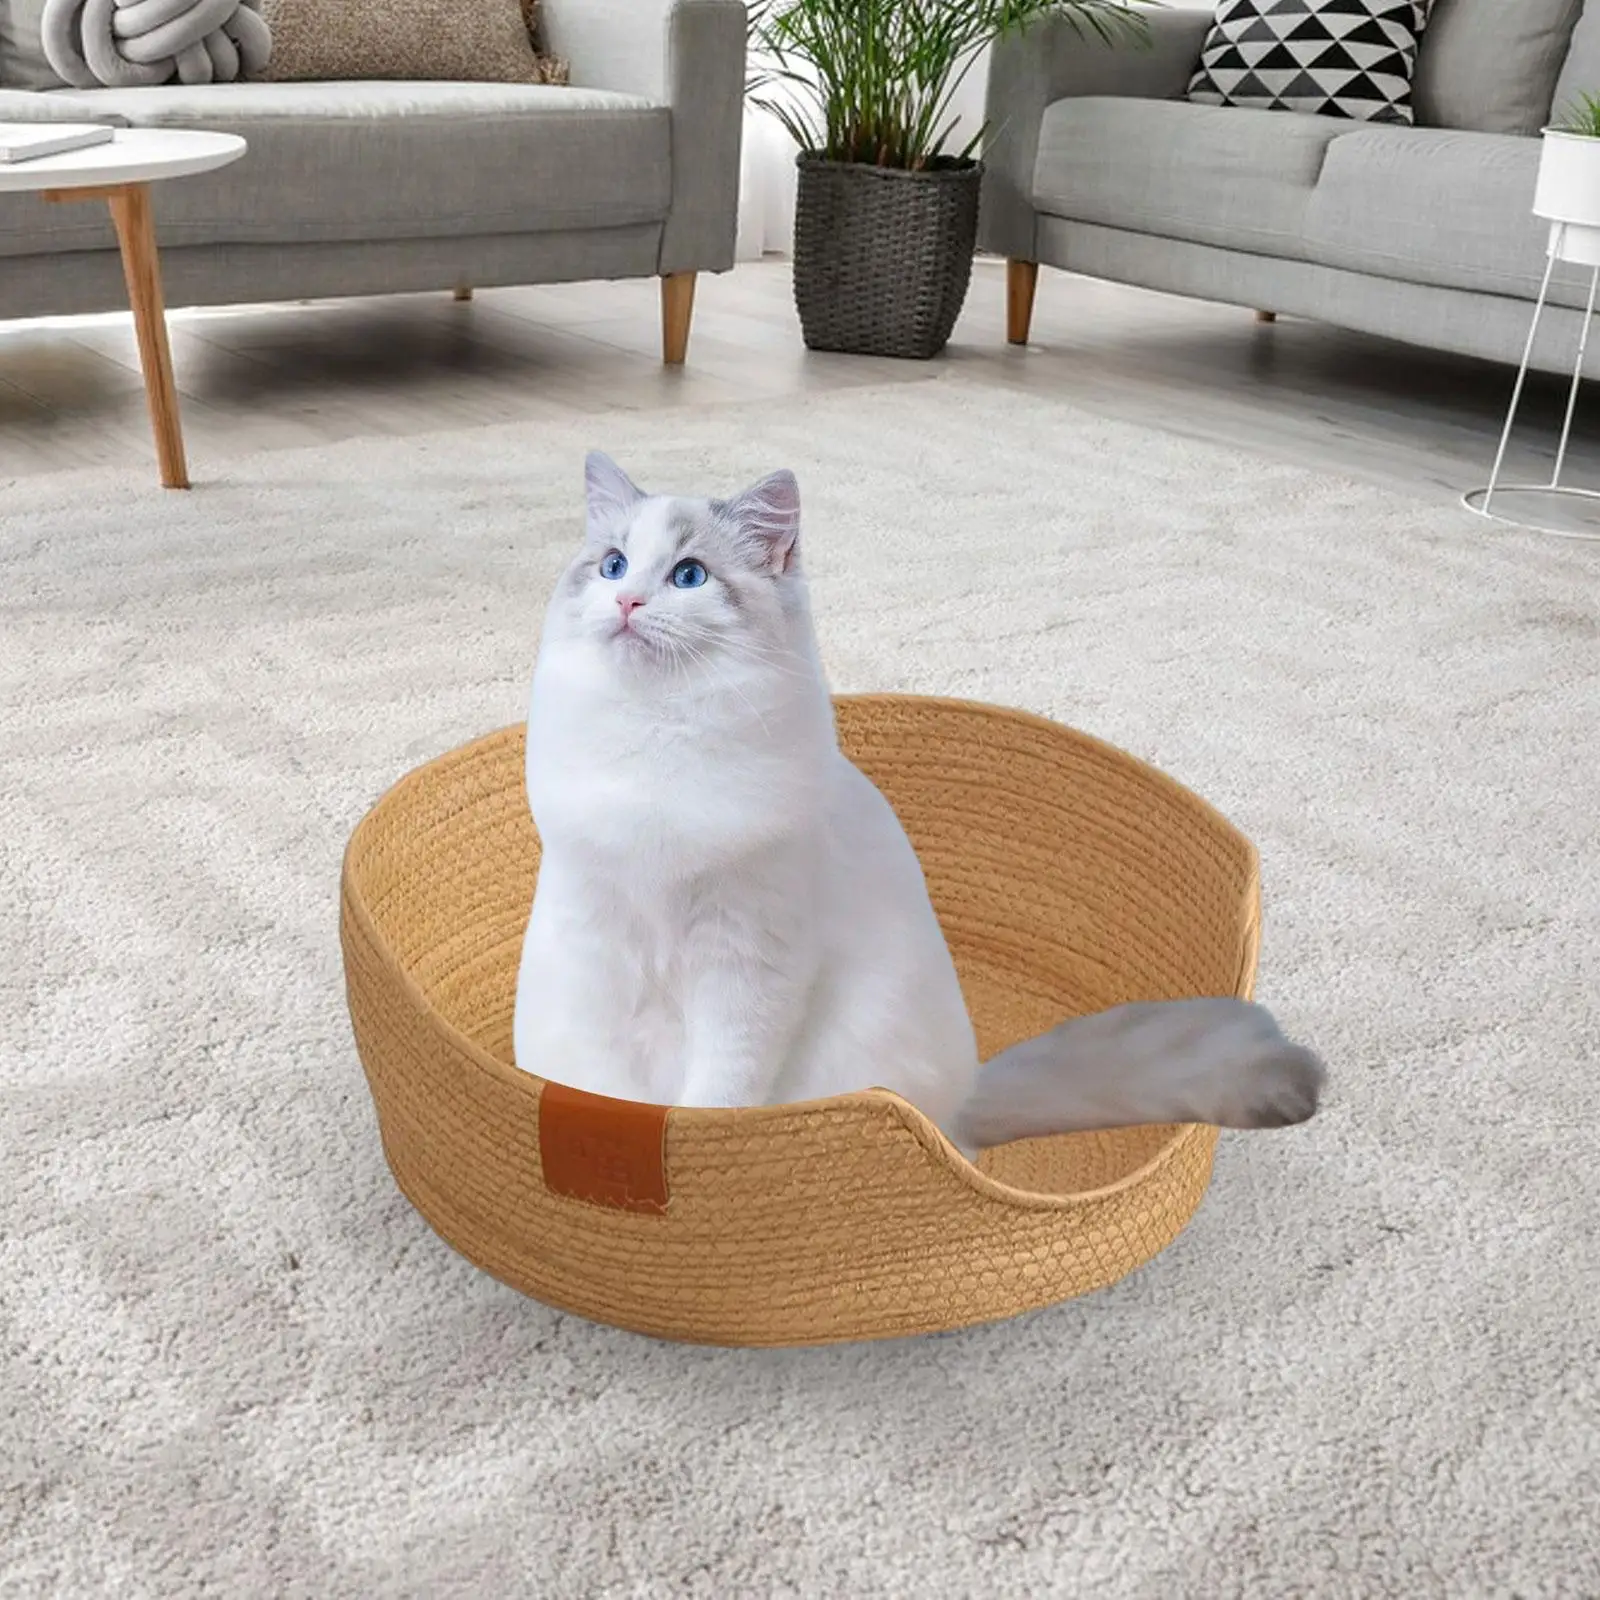 Handwoven Kitten Bed Cat Sleeping Basket Diameter 45cm Comfortable Ventilated Paper Rope Material Handmade for Playing and Rest